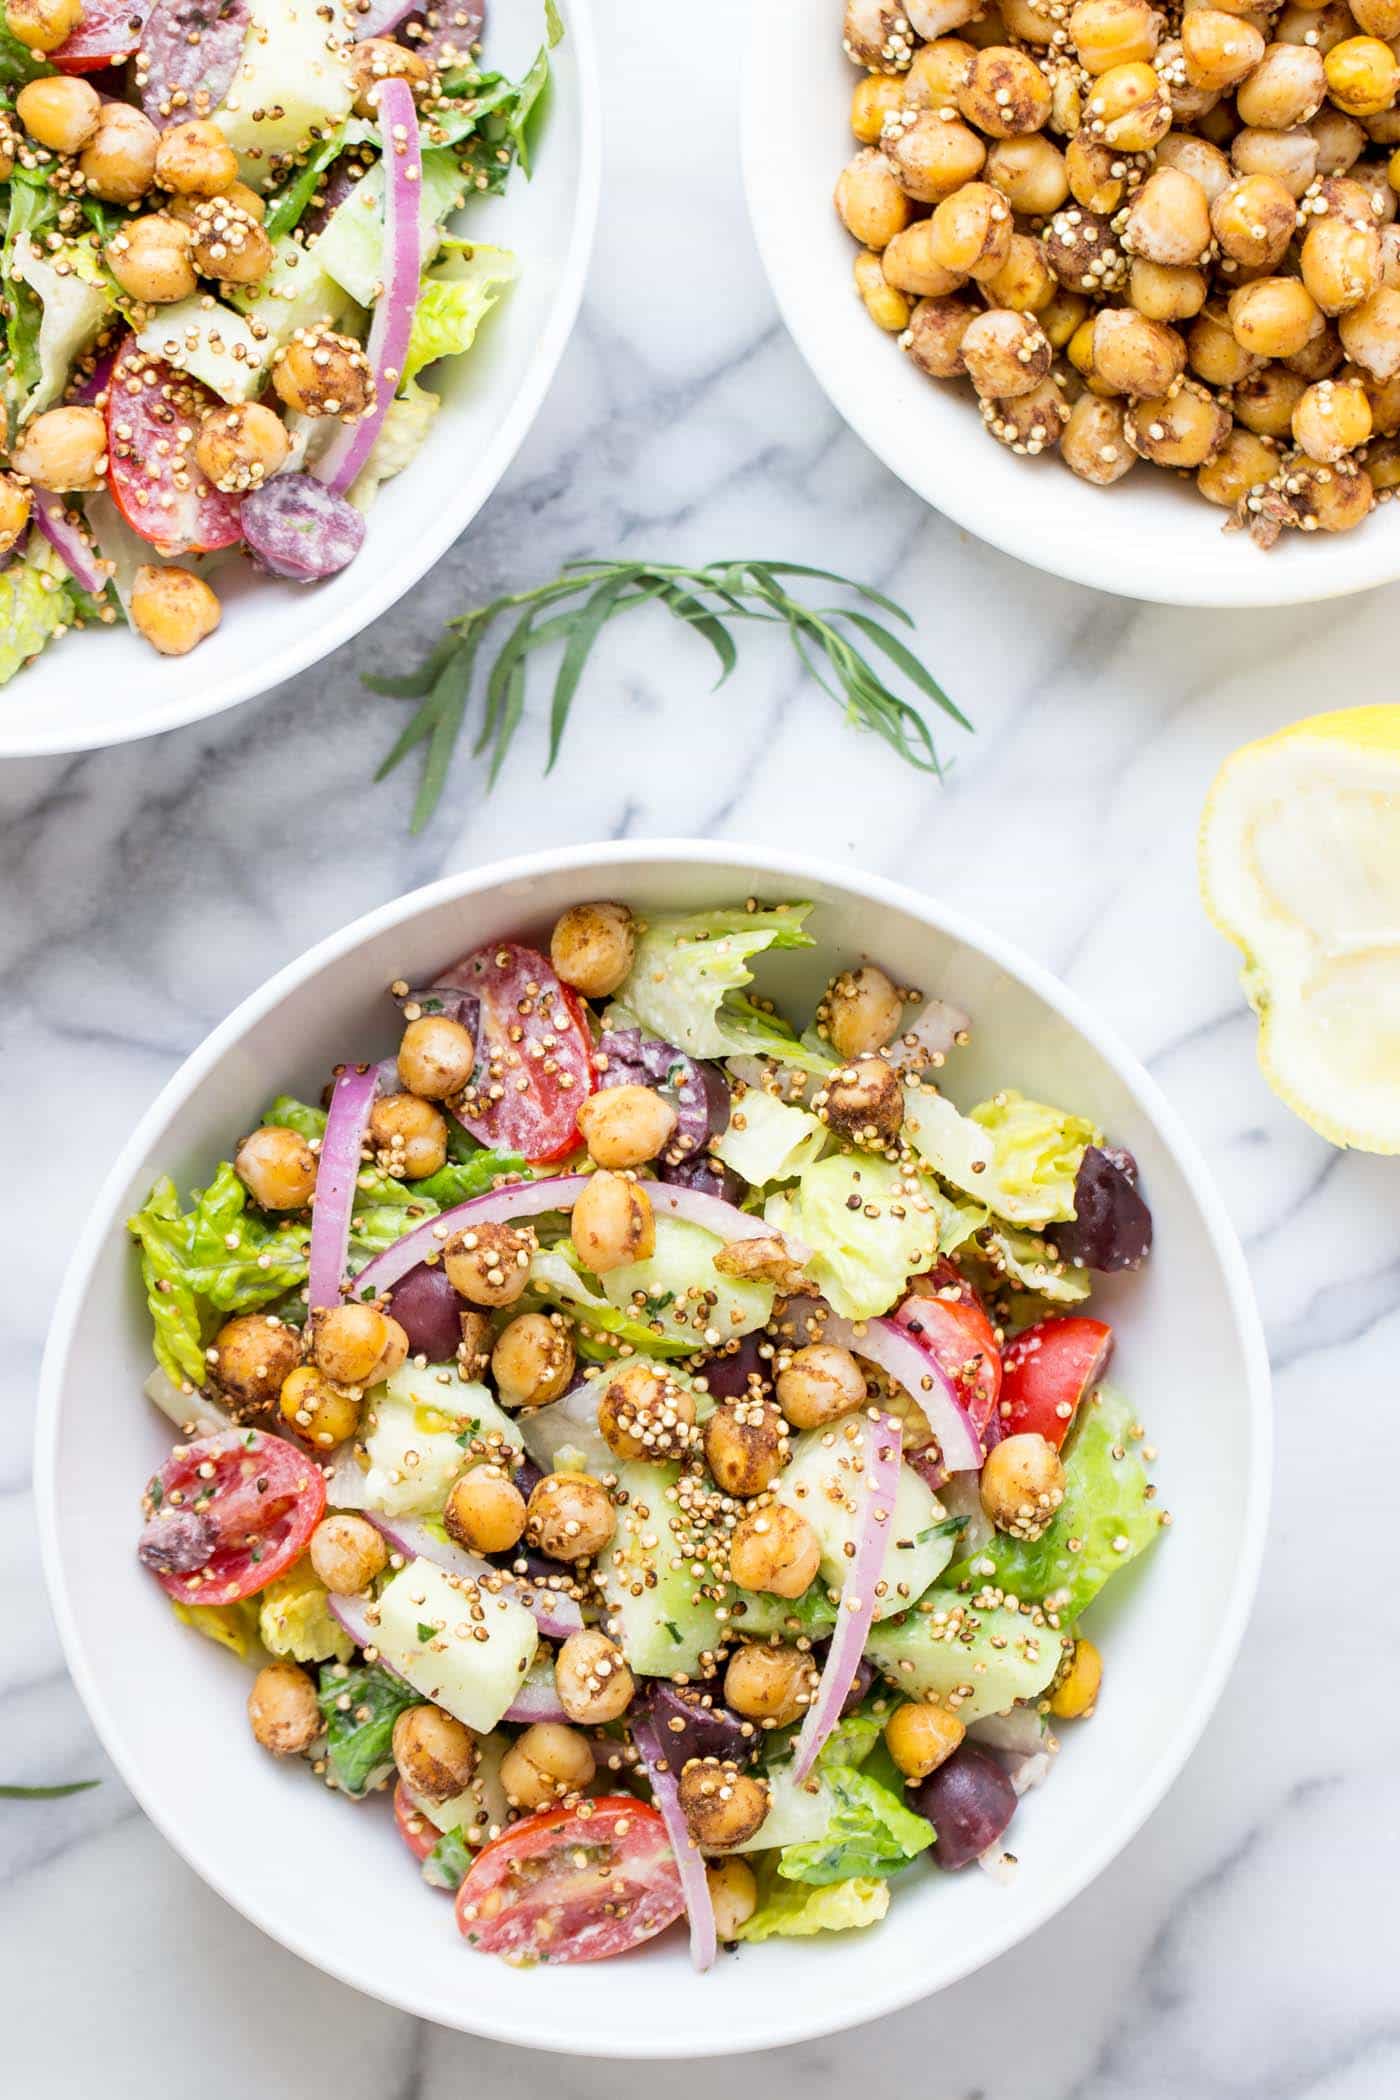 An AMAZING vegan chopped salad with tons of veggies, warm chickpeas and a tarragon tahini dressing!